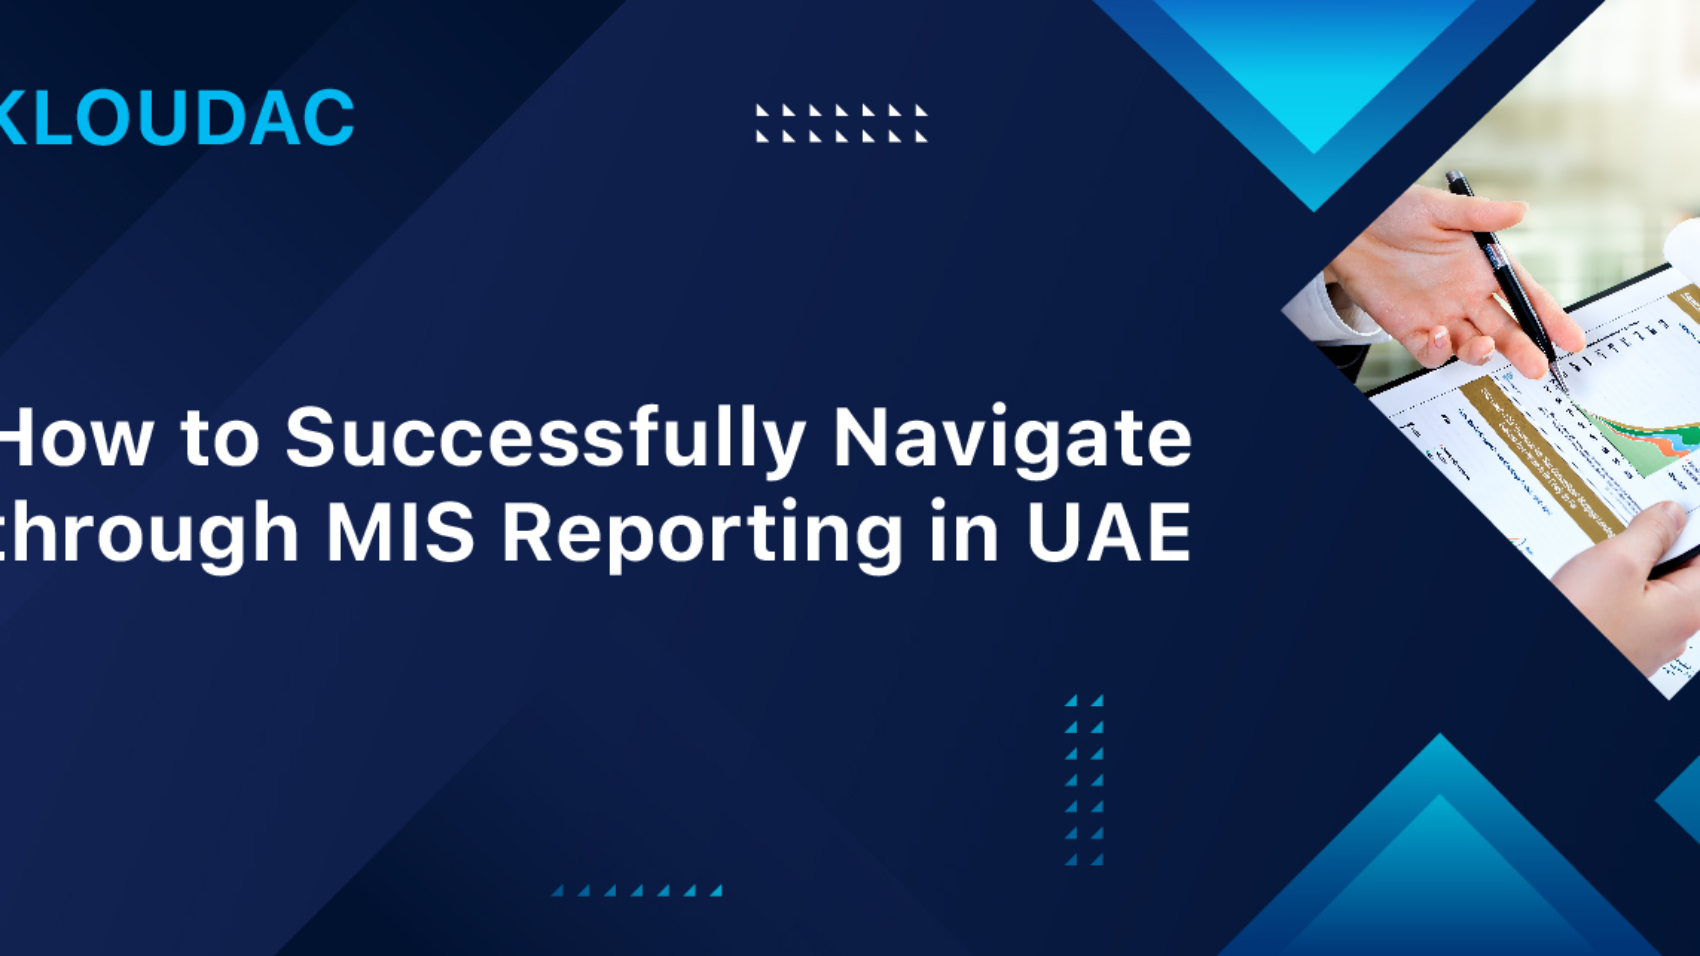 How to Successfully Navigate through MIS Reporting in UAE